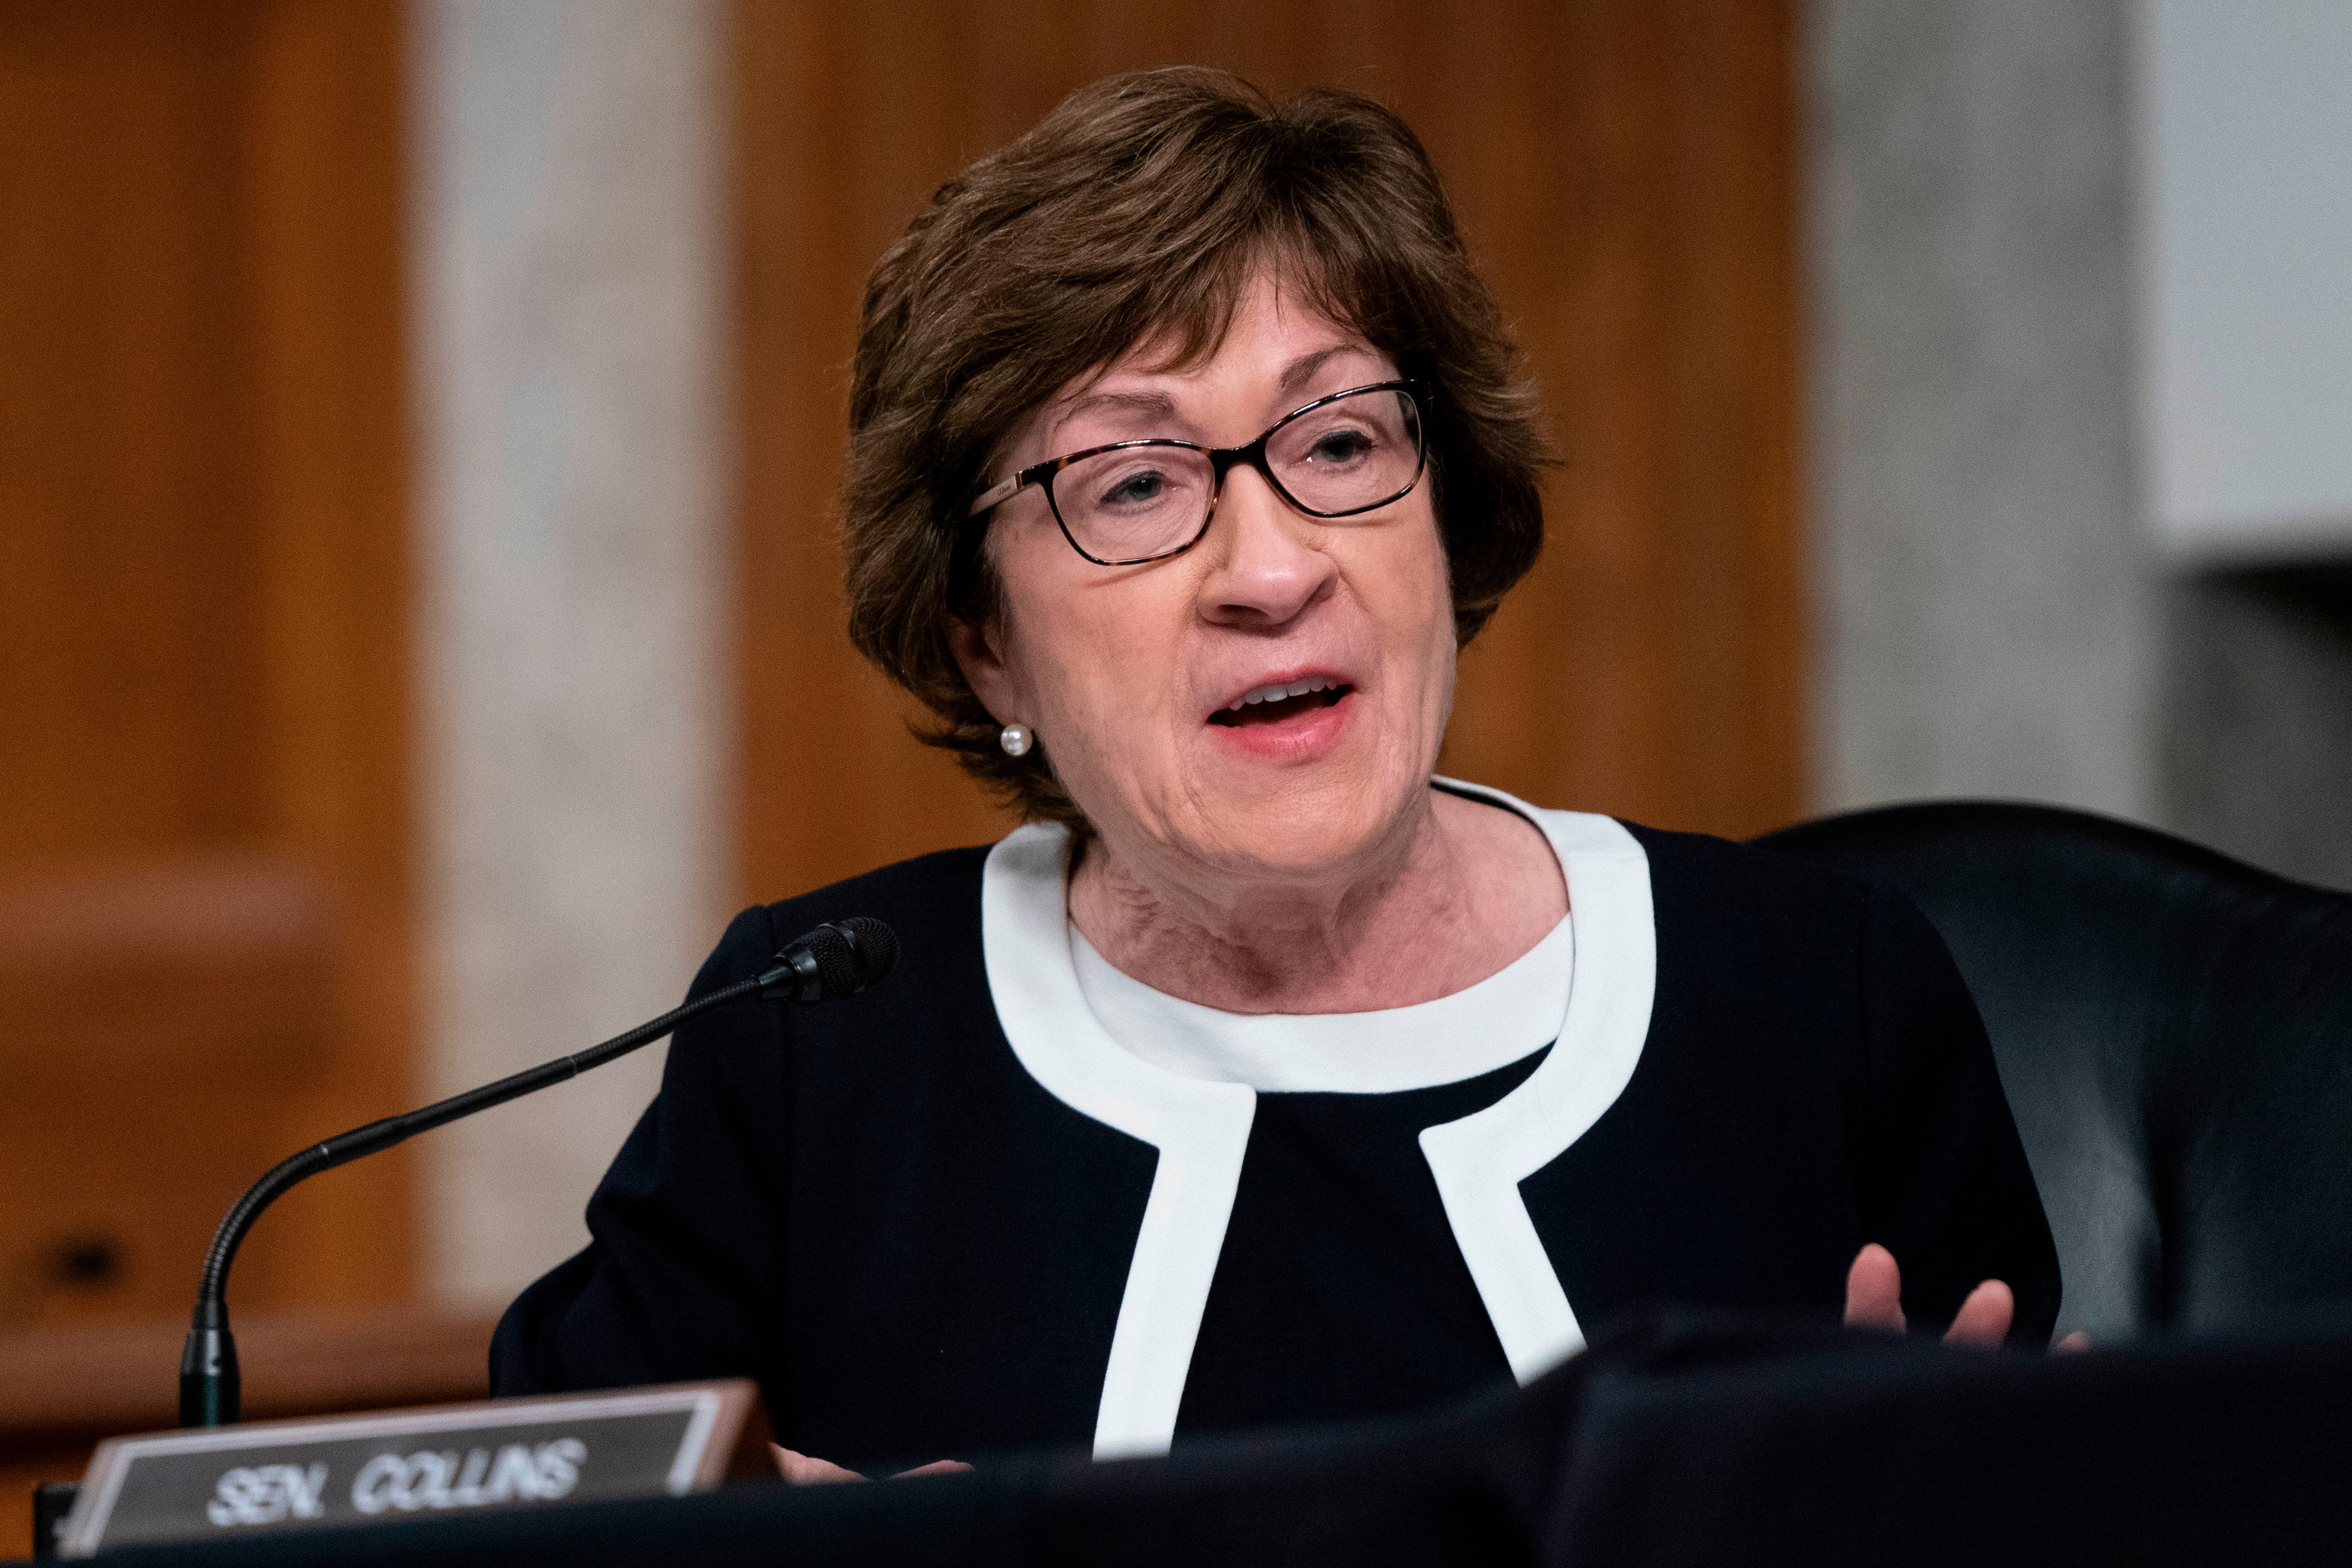 Susan Collins calls Texas abortion law ‘inhumane,’ defends Roe v. Wade as ‘law of the land’